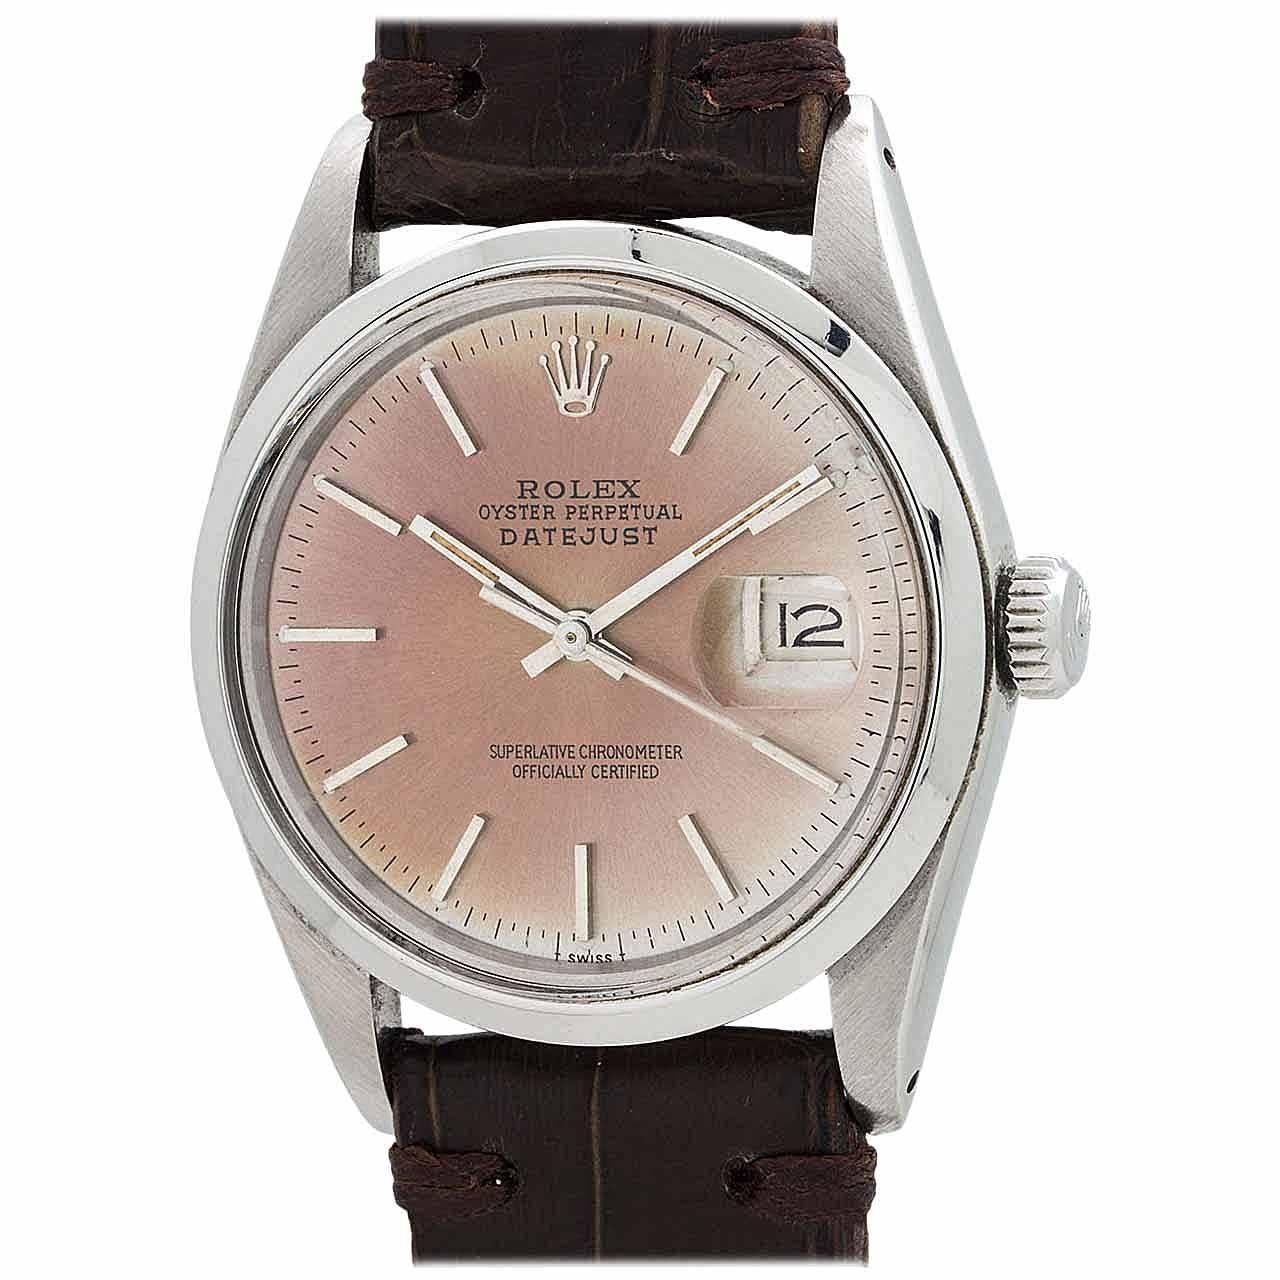 Rolex Stainless Steel Datejust Patina’d Dial Automatic Wristwatch Ref 16000 1978